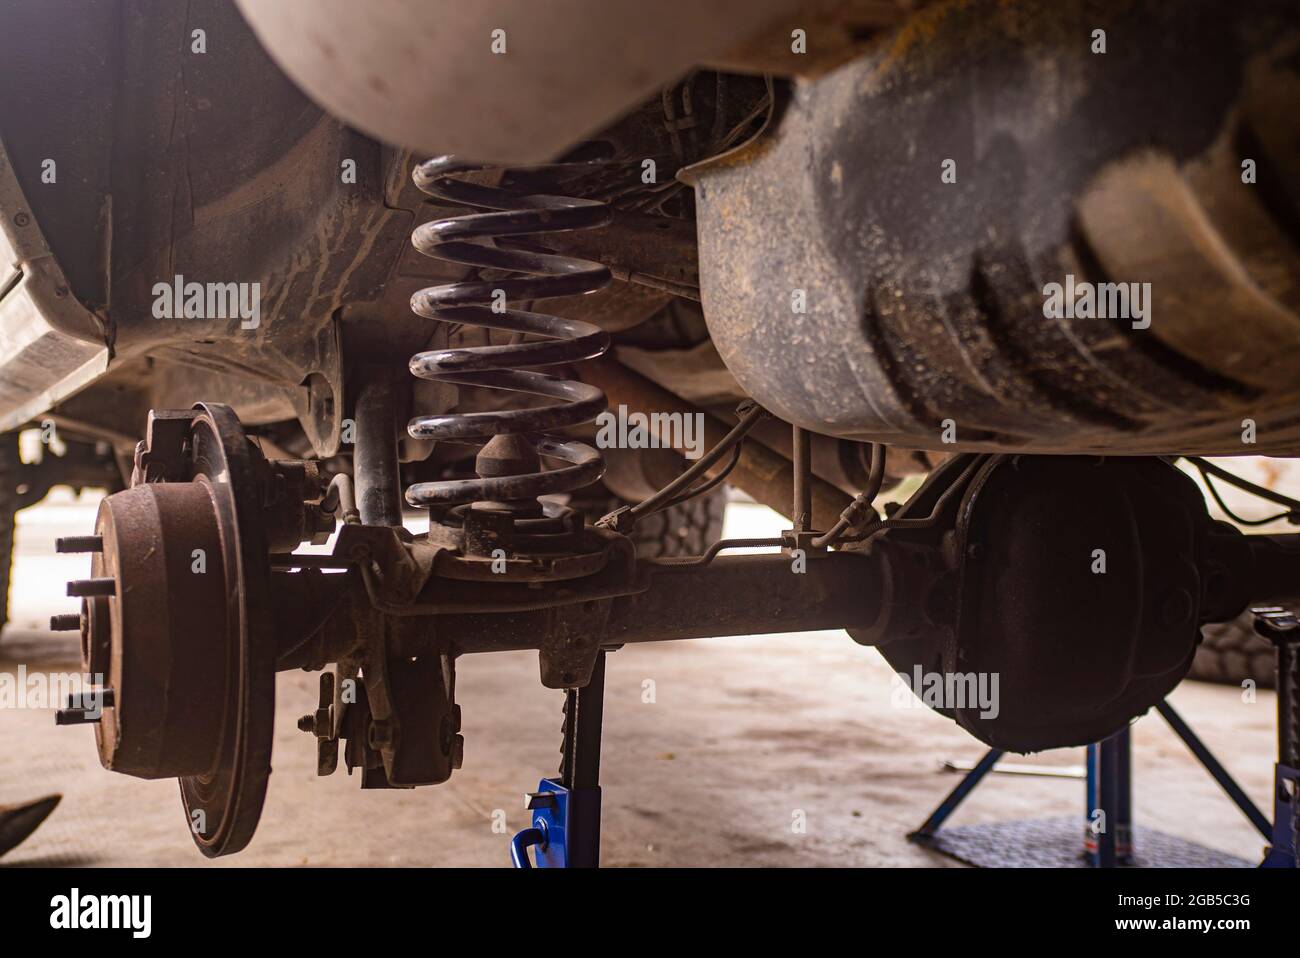 Suspension of the off road car ready for repair Stock Photo